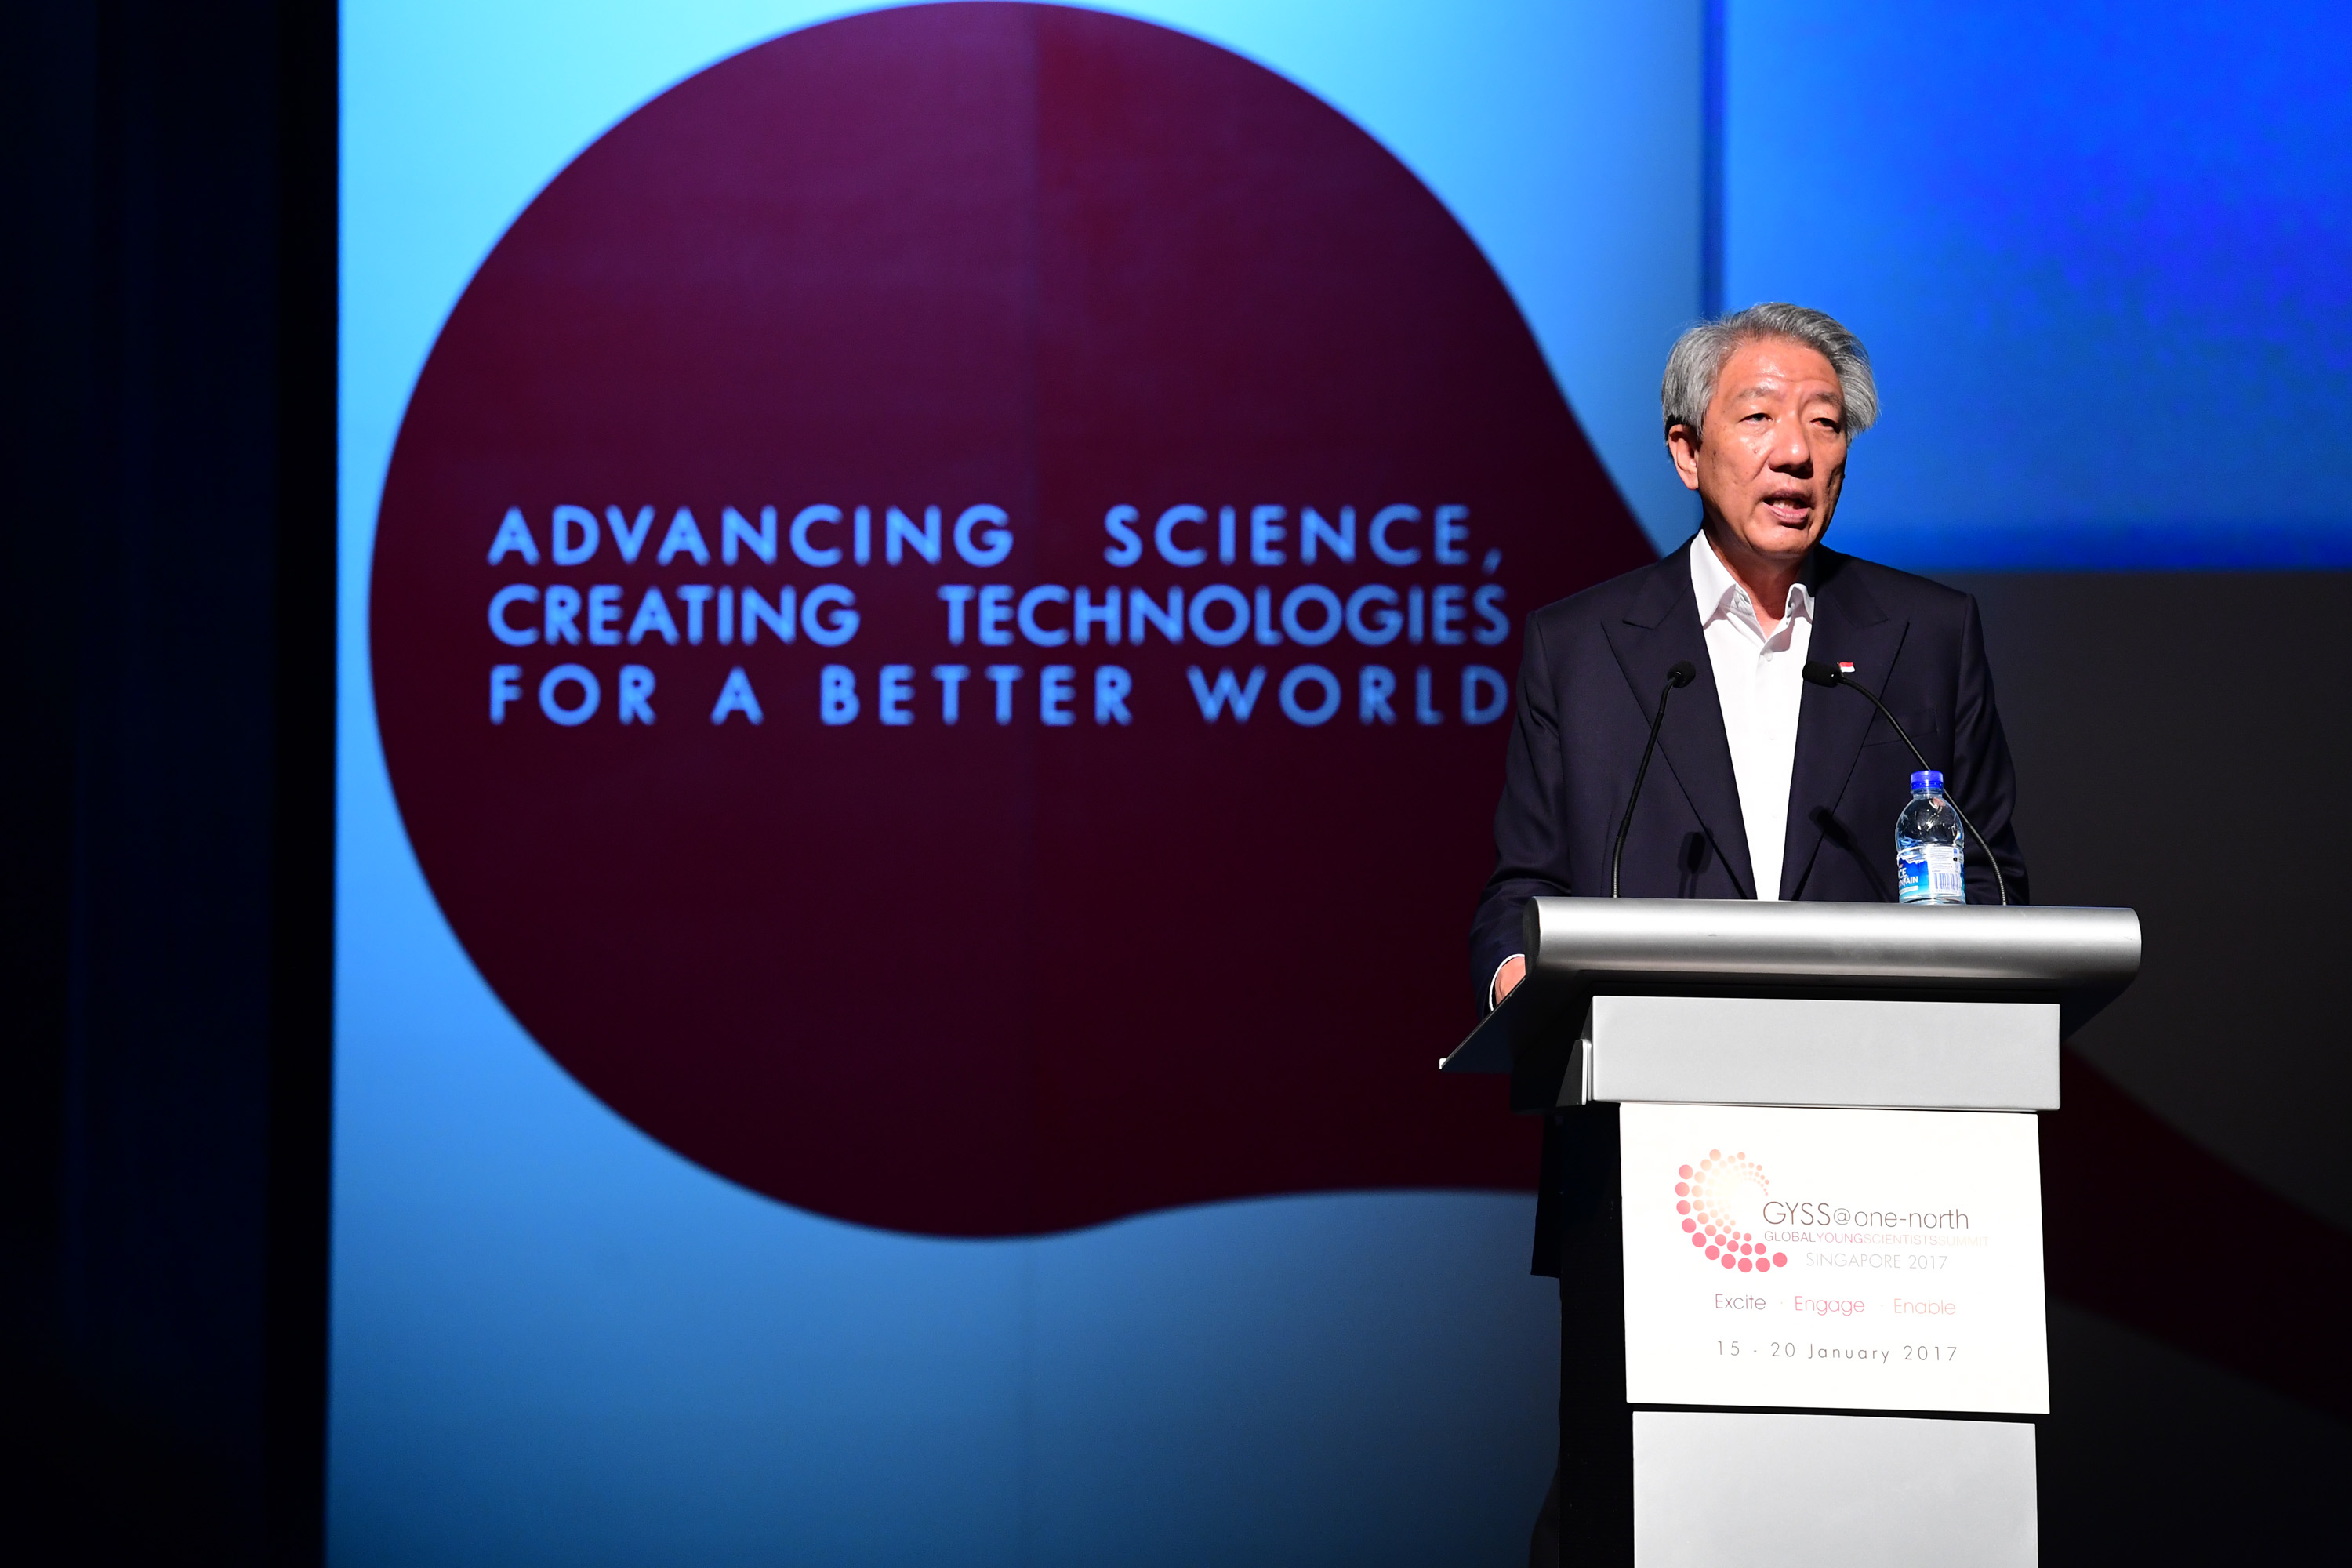 DPM at the Global Young Scientists Summit Opening on 15 January 2017